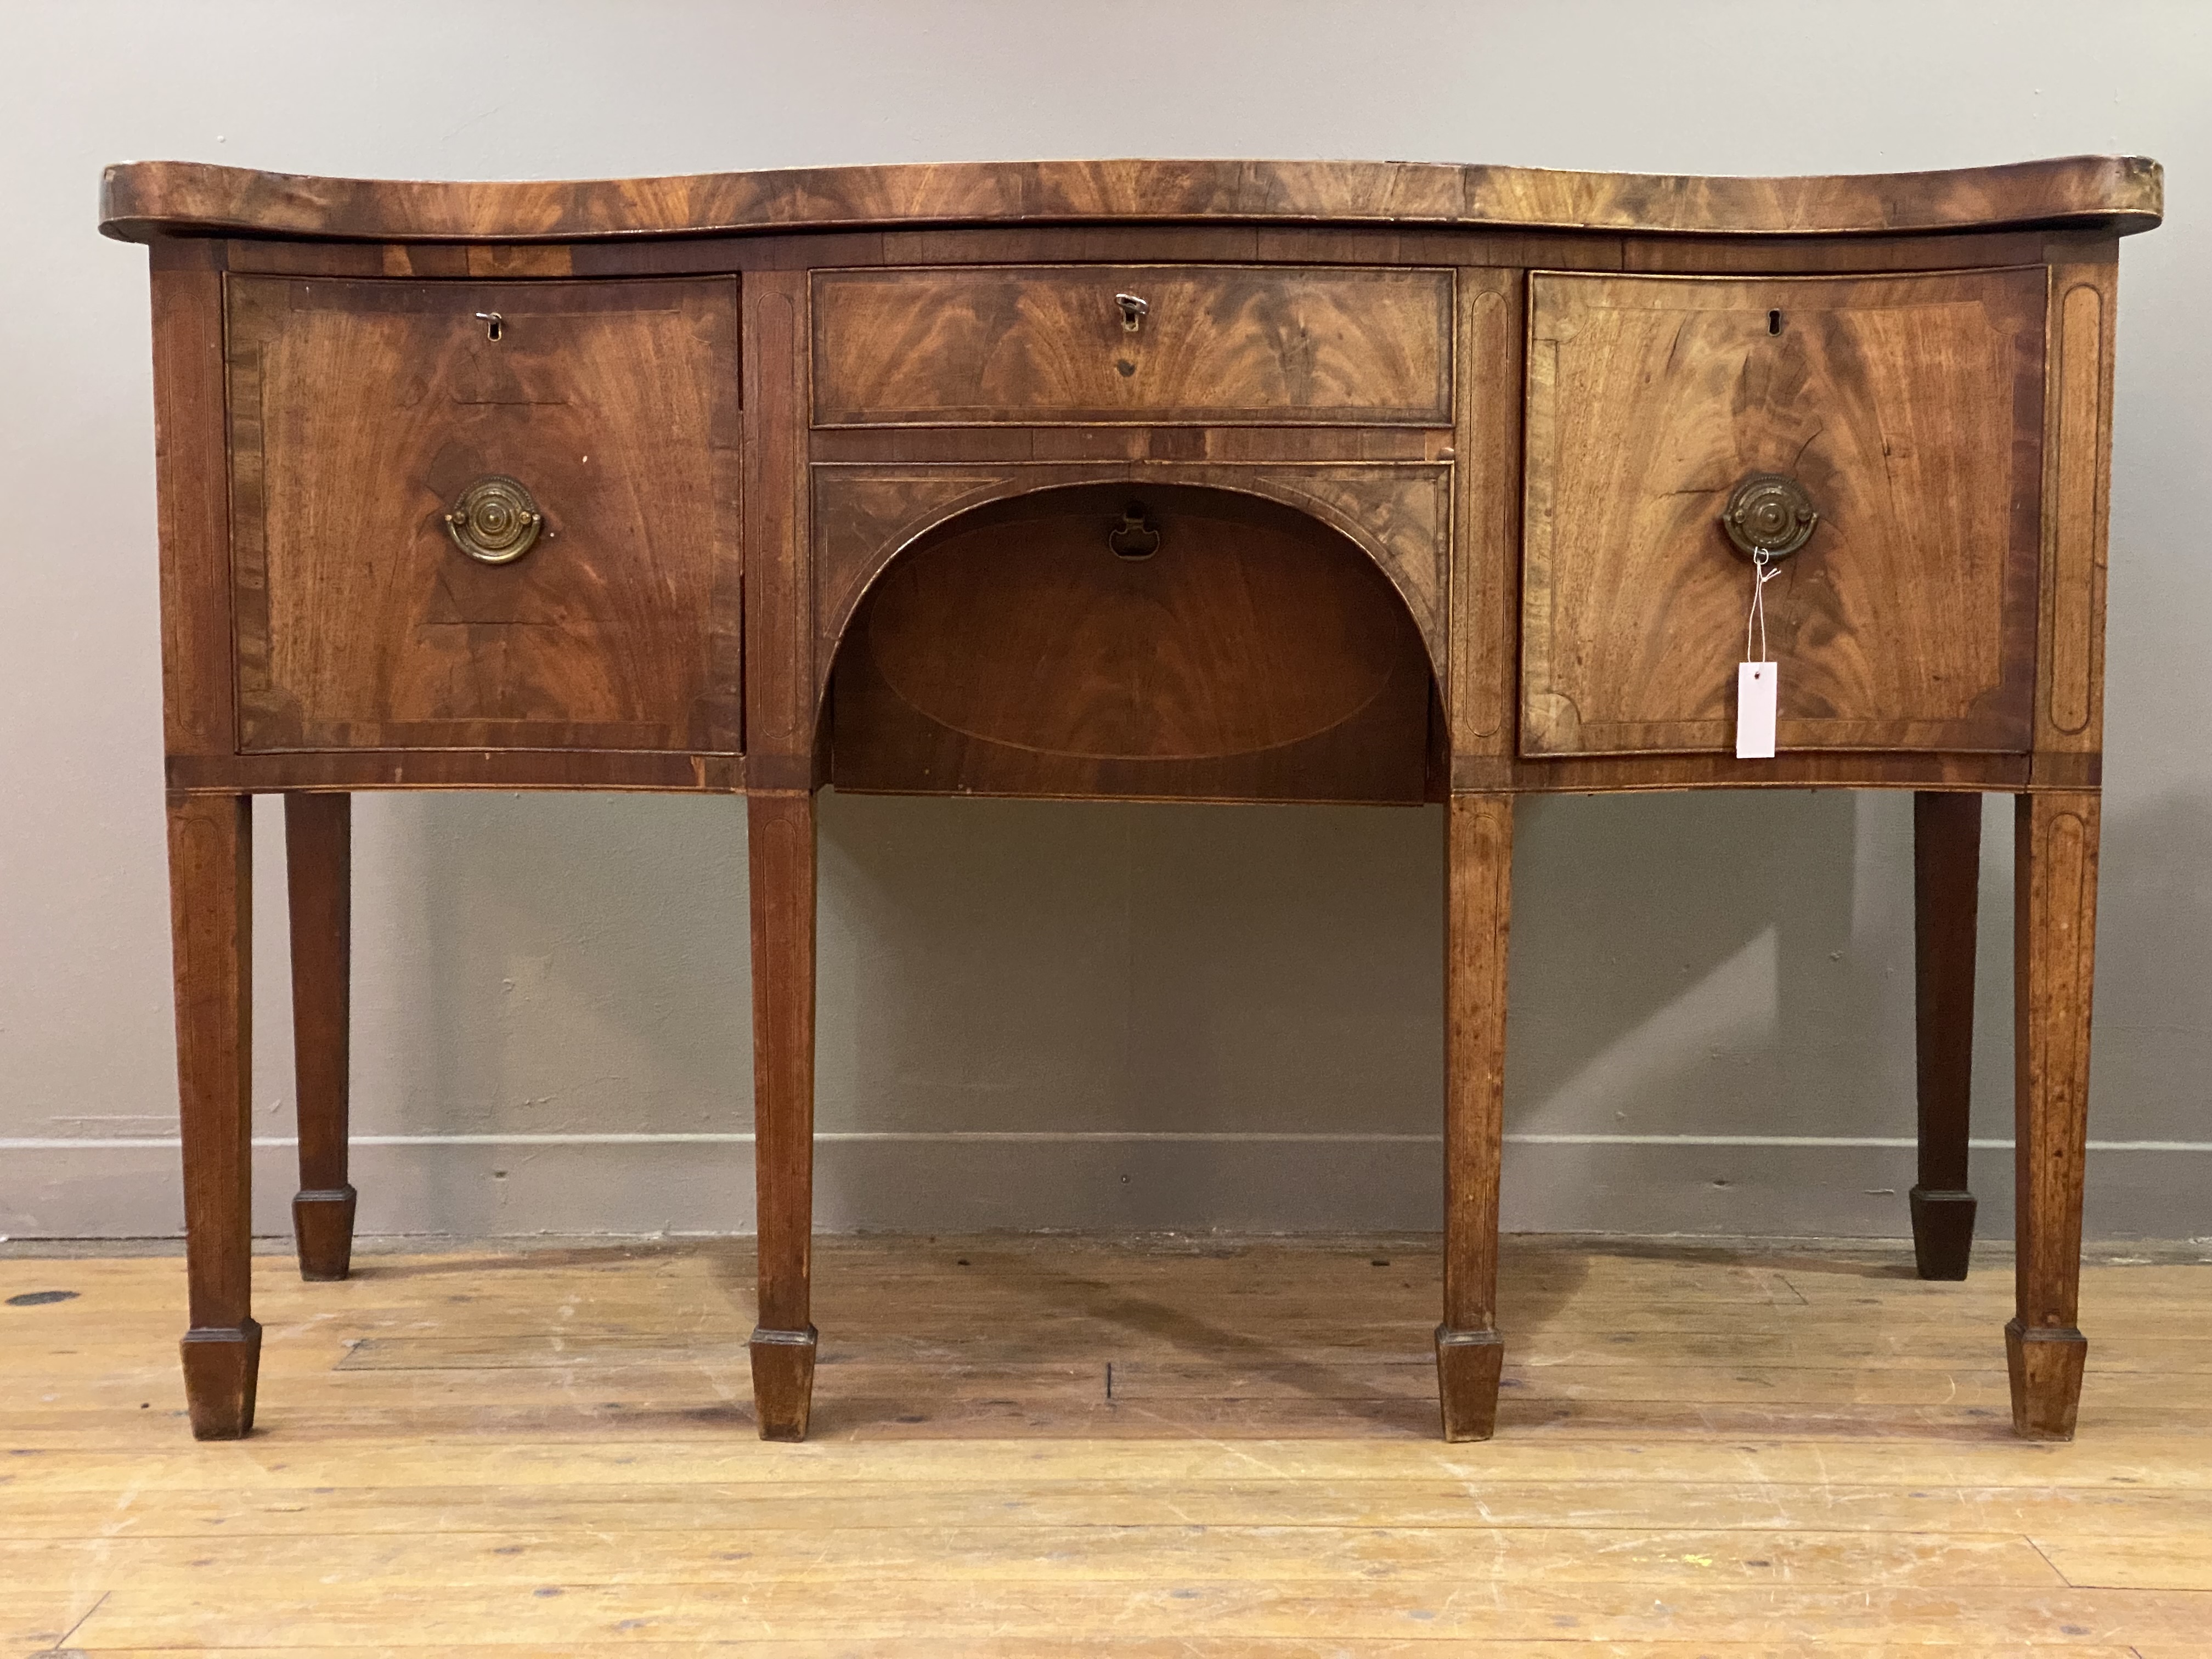 A George III mahogany serving table of deep and squat proportions, late 18th century, the